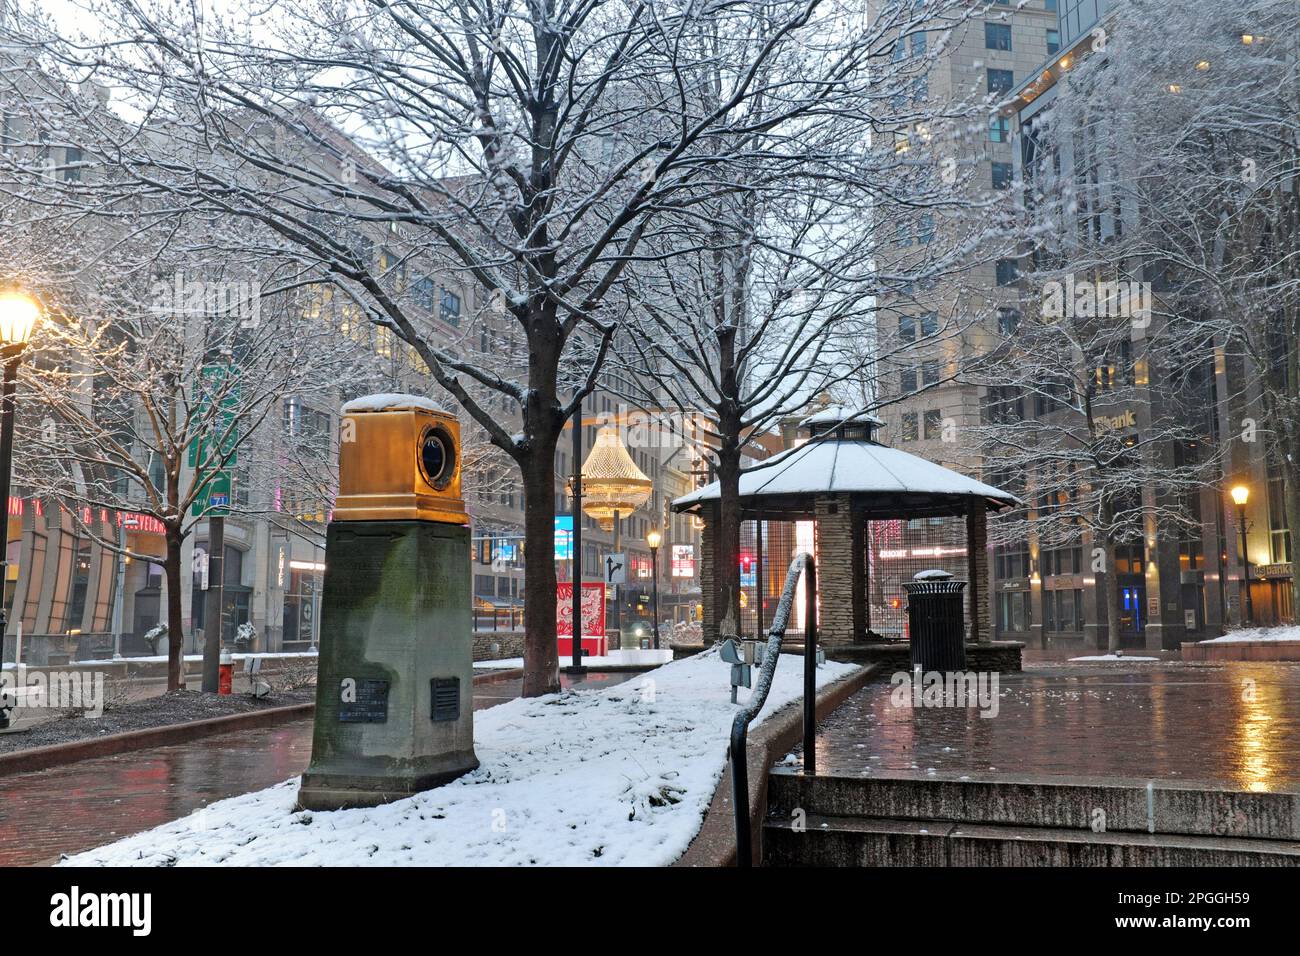 US Bank Plaza in the Playhouse Square Theater district in downtown Cleveland, Ohio, USA on March 13, 2023 after a fresh snowfall. Stock Photo